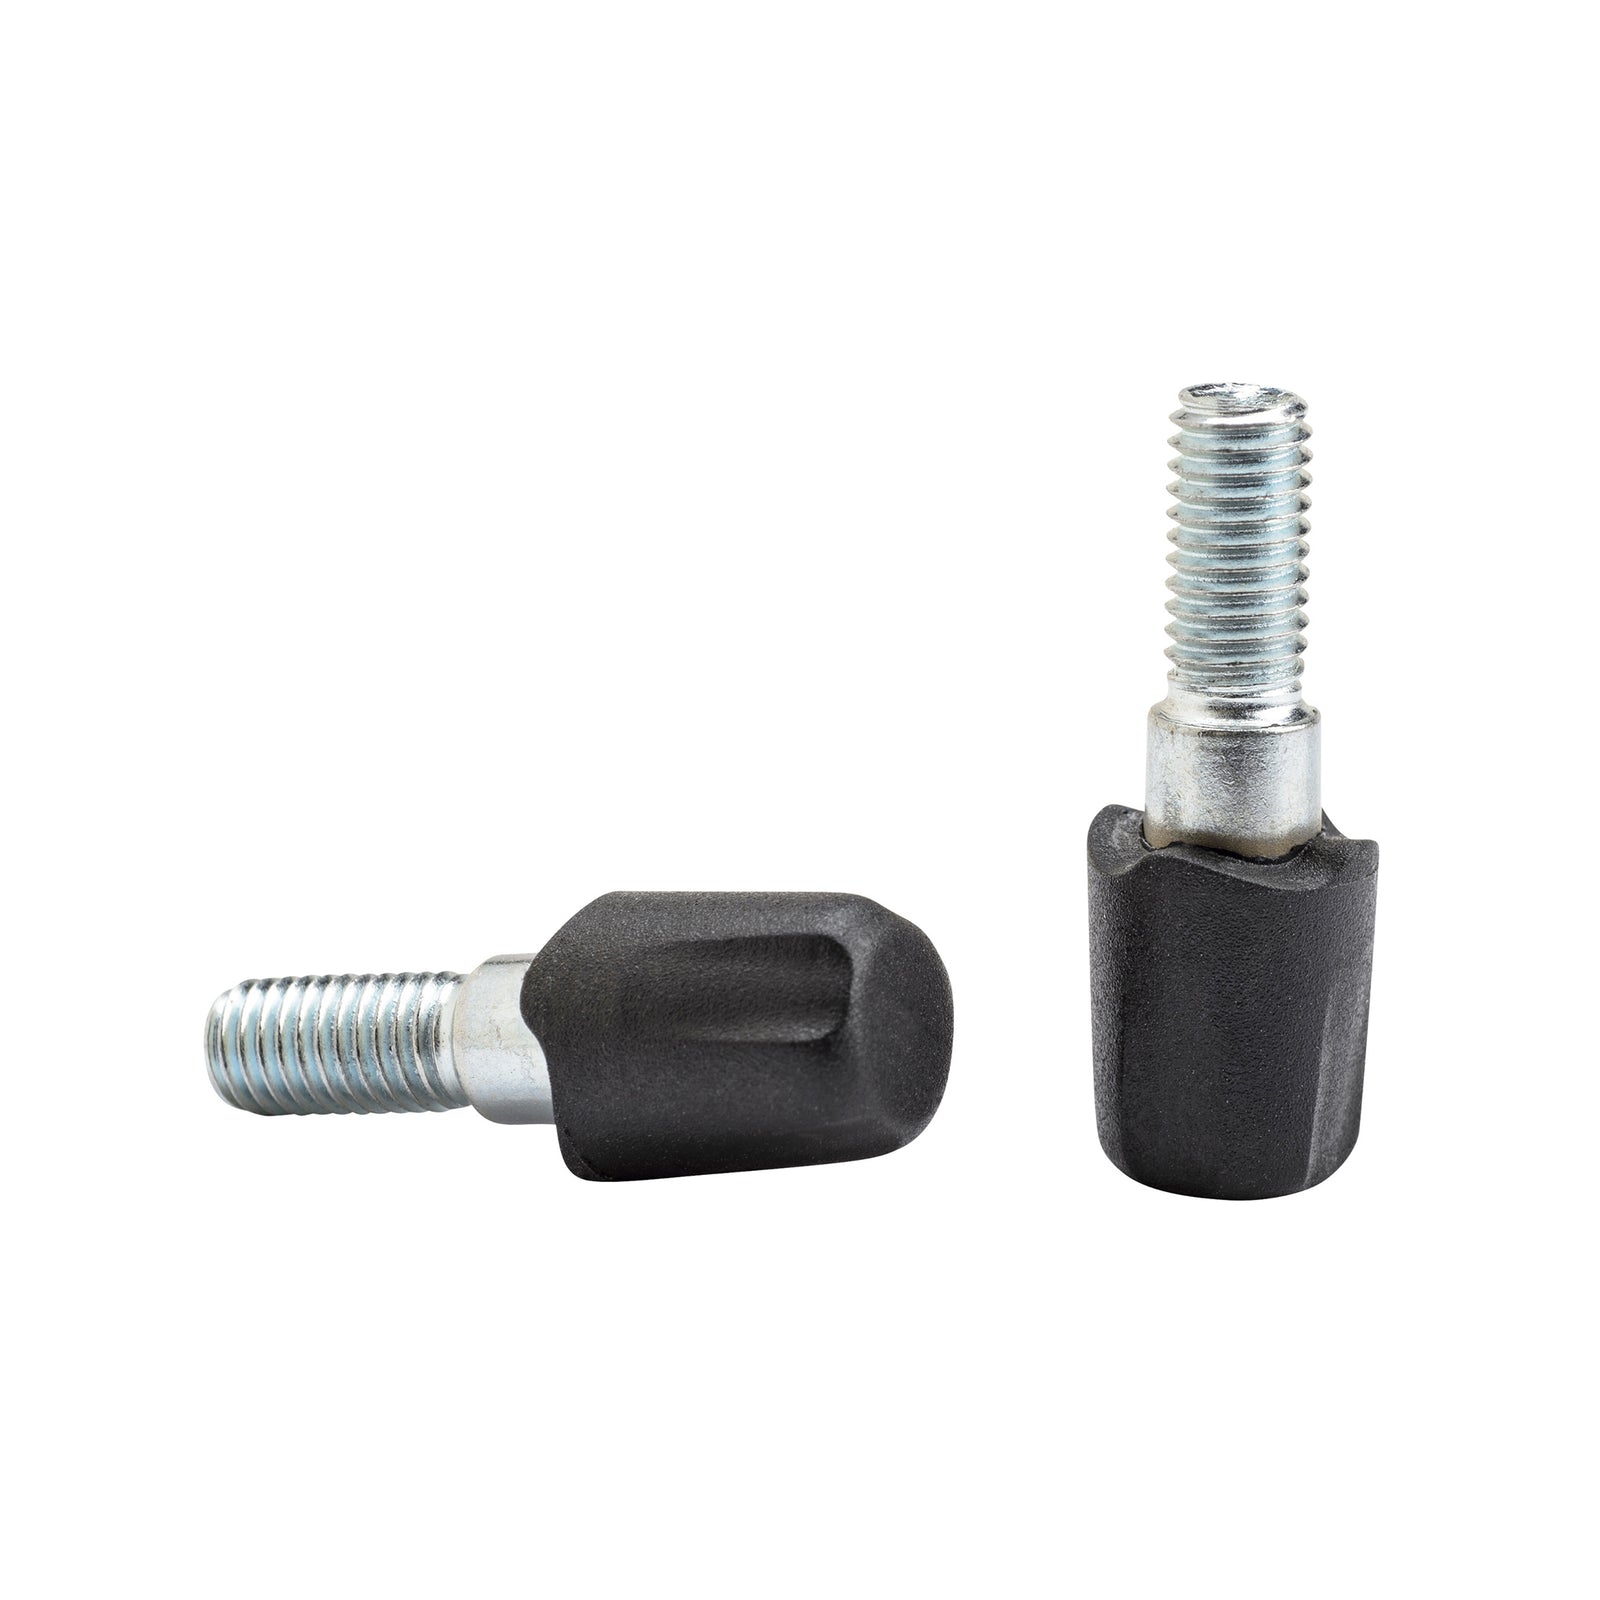 screw on replacement tips for trekking poles